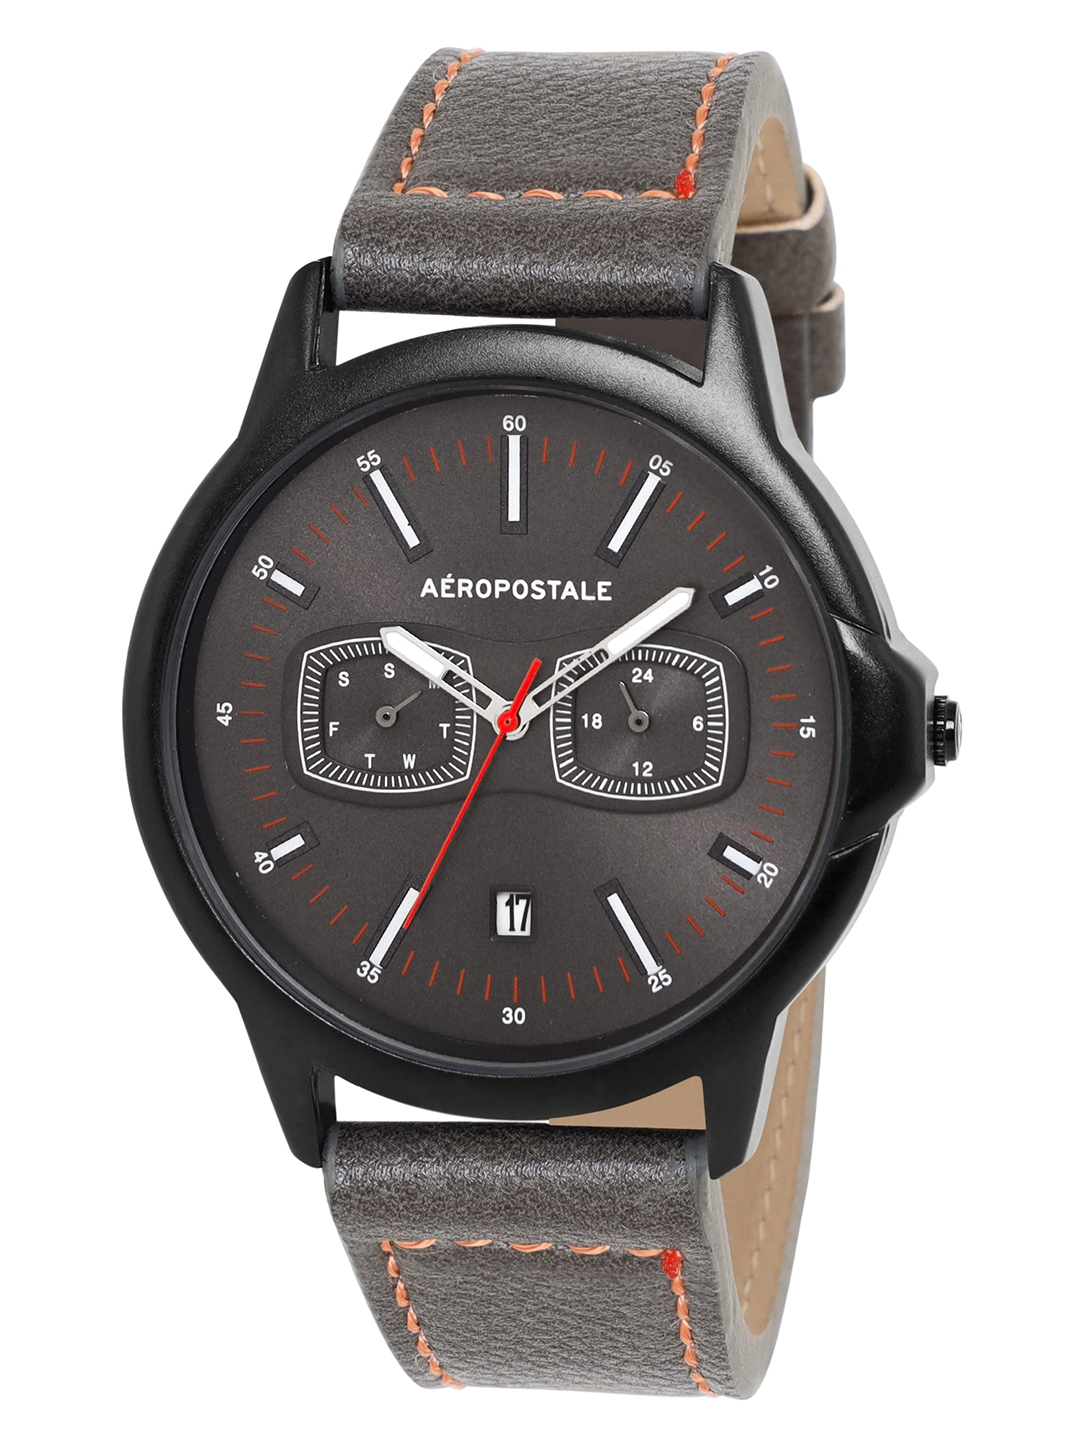 Aeropostale | Aeropostale "AERO_AW_A8-2_DGRY" Classic Men’s Analog Quartz Wrist Watch, Black Metal Alloy case, Classic Green Dial with contrasting white hand, Leather  wrist Band  Water resistant 3.0 ATM. 1